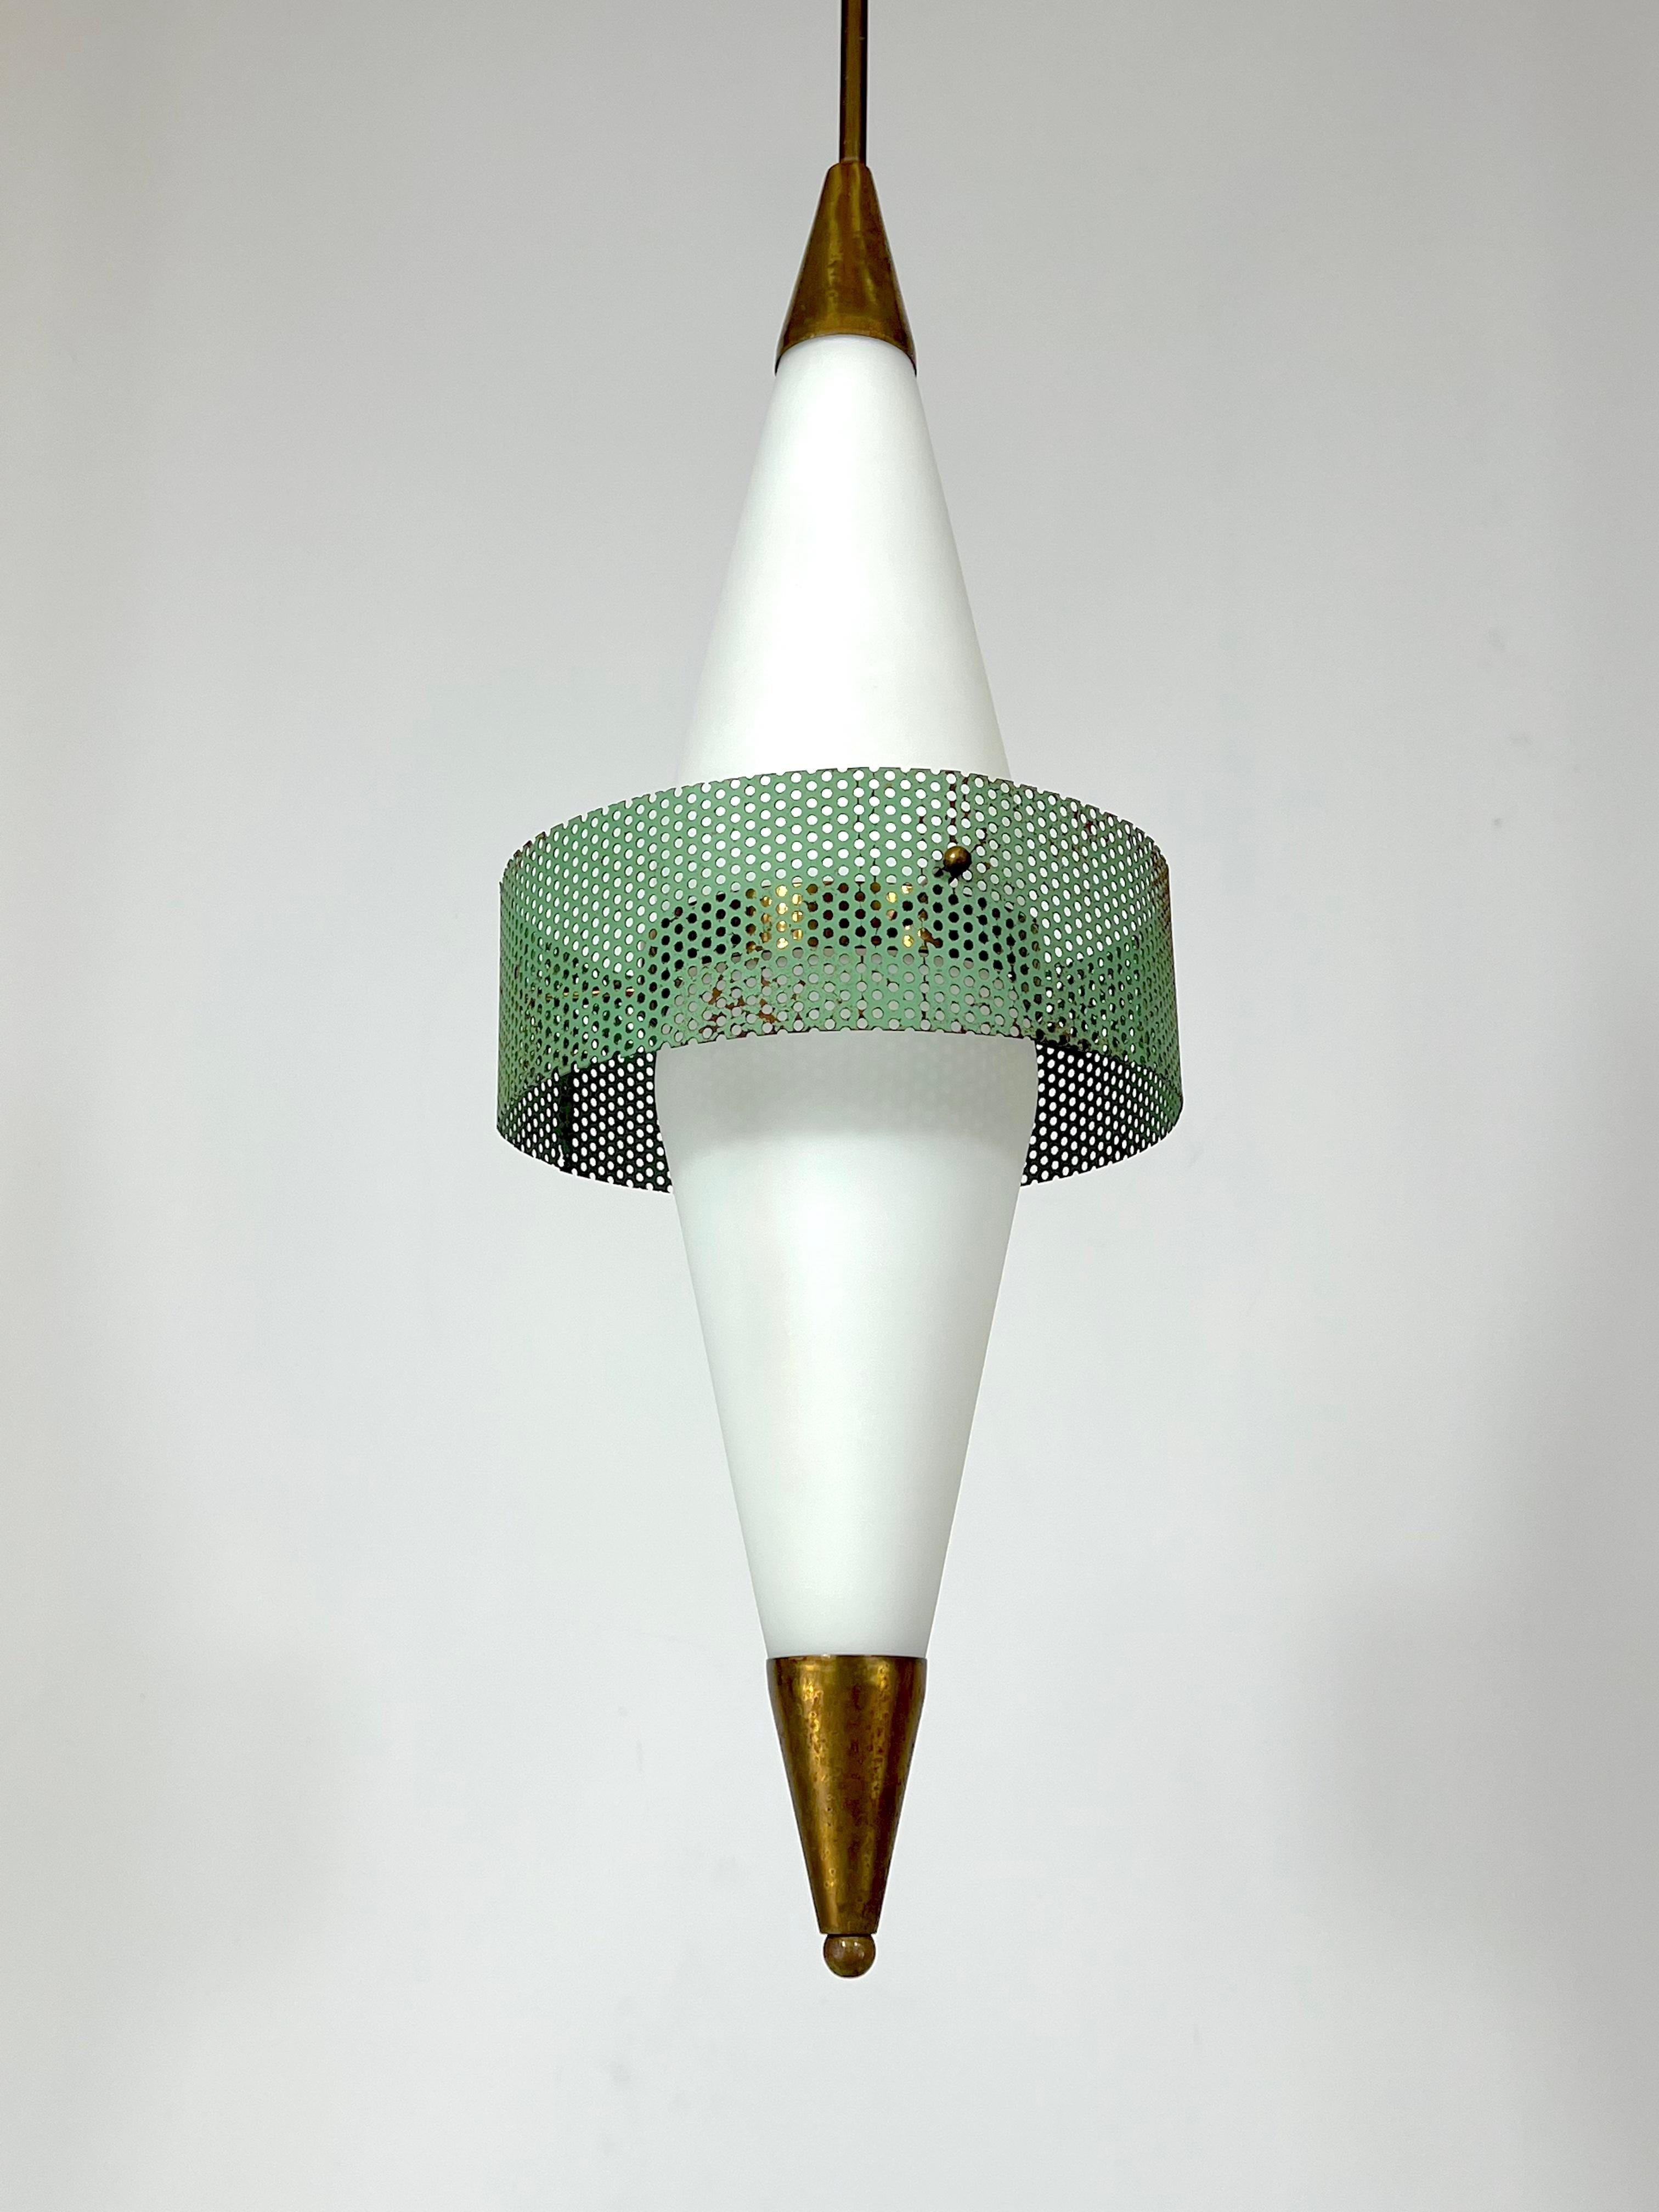 Vintage unaltered condition with normal trace of age and use but a cut on the brass upper part as shown in a detailed image. Very rare pendant lamp produced by Stilnovo during the 50s. Triplex opaline glasses. Height of fixture without rod 58 cm.